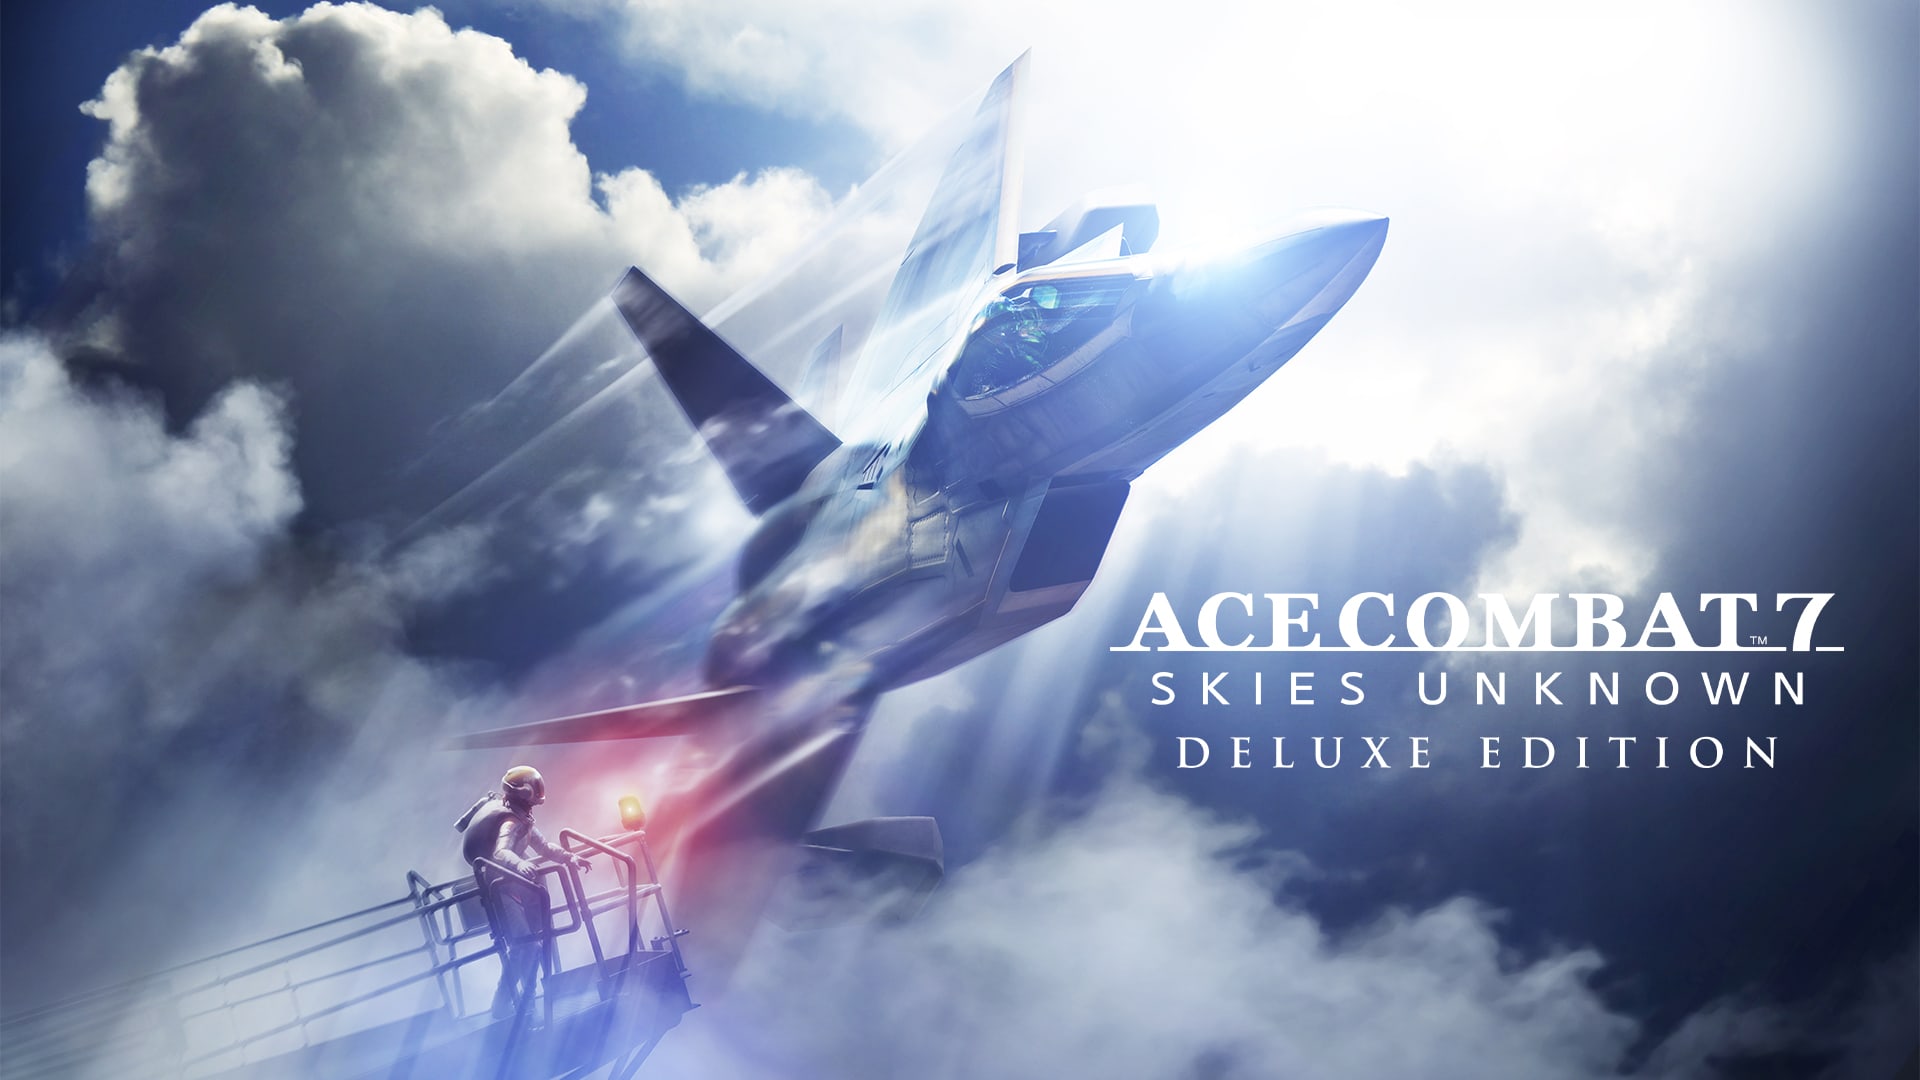 ACE COMBAT™7: SKIES UNKNOWN – ÉDITION DELUXE